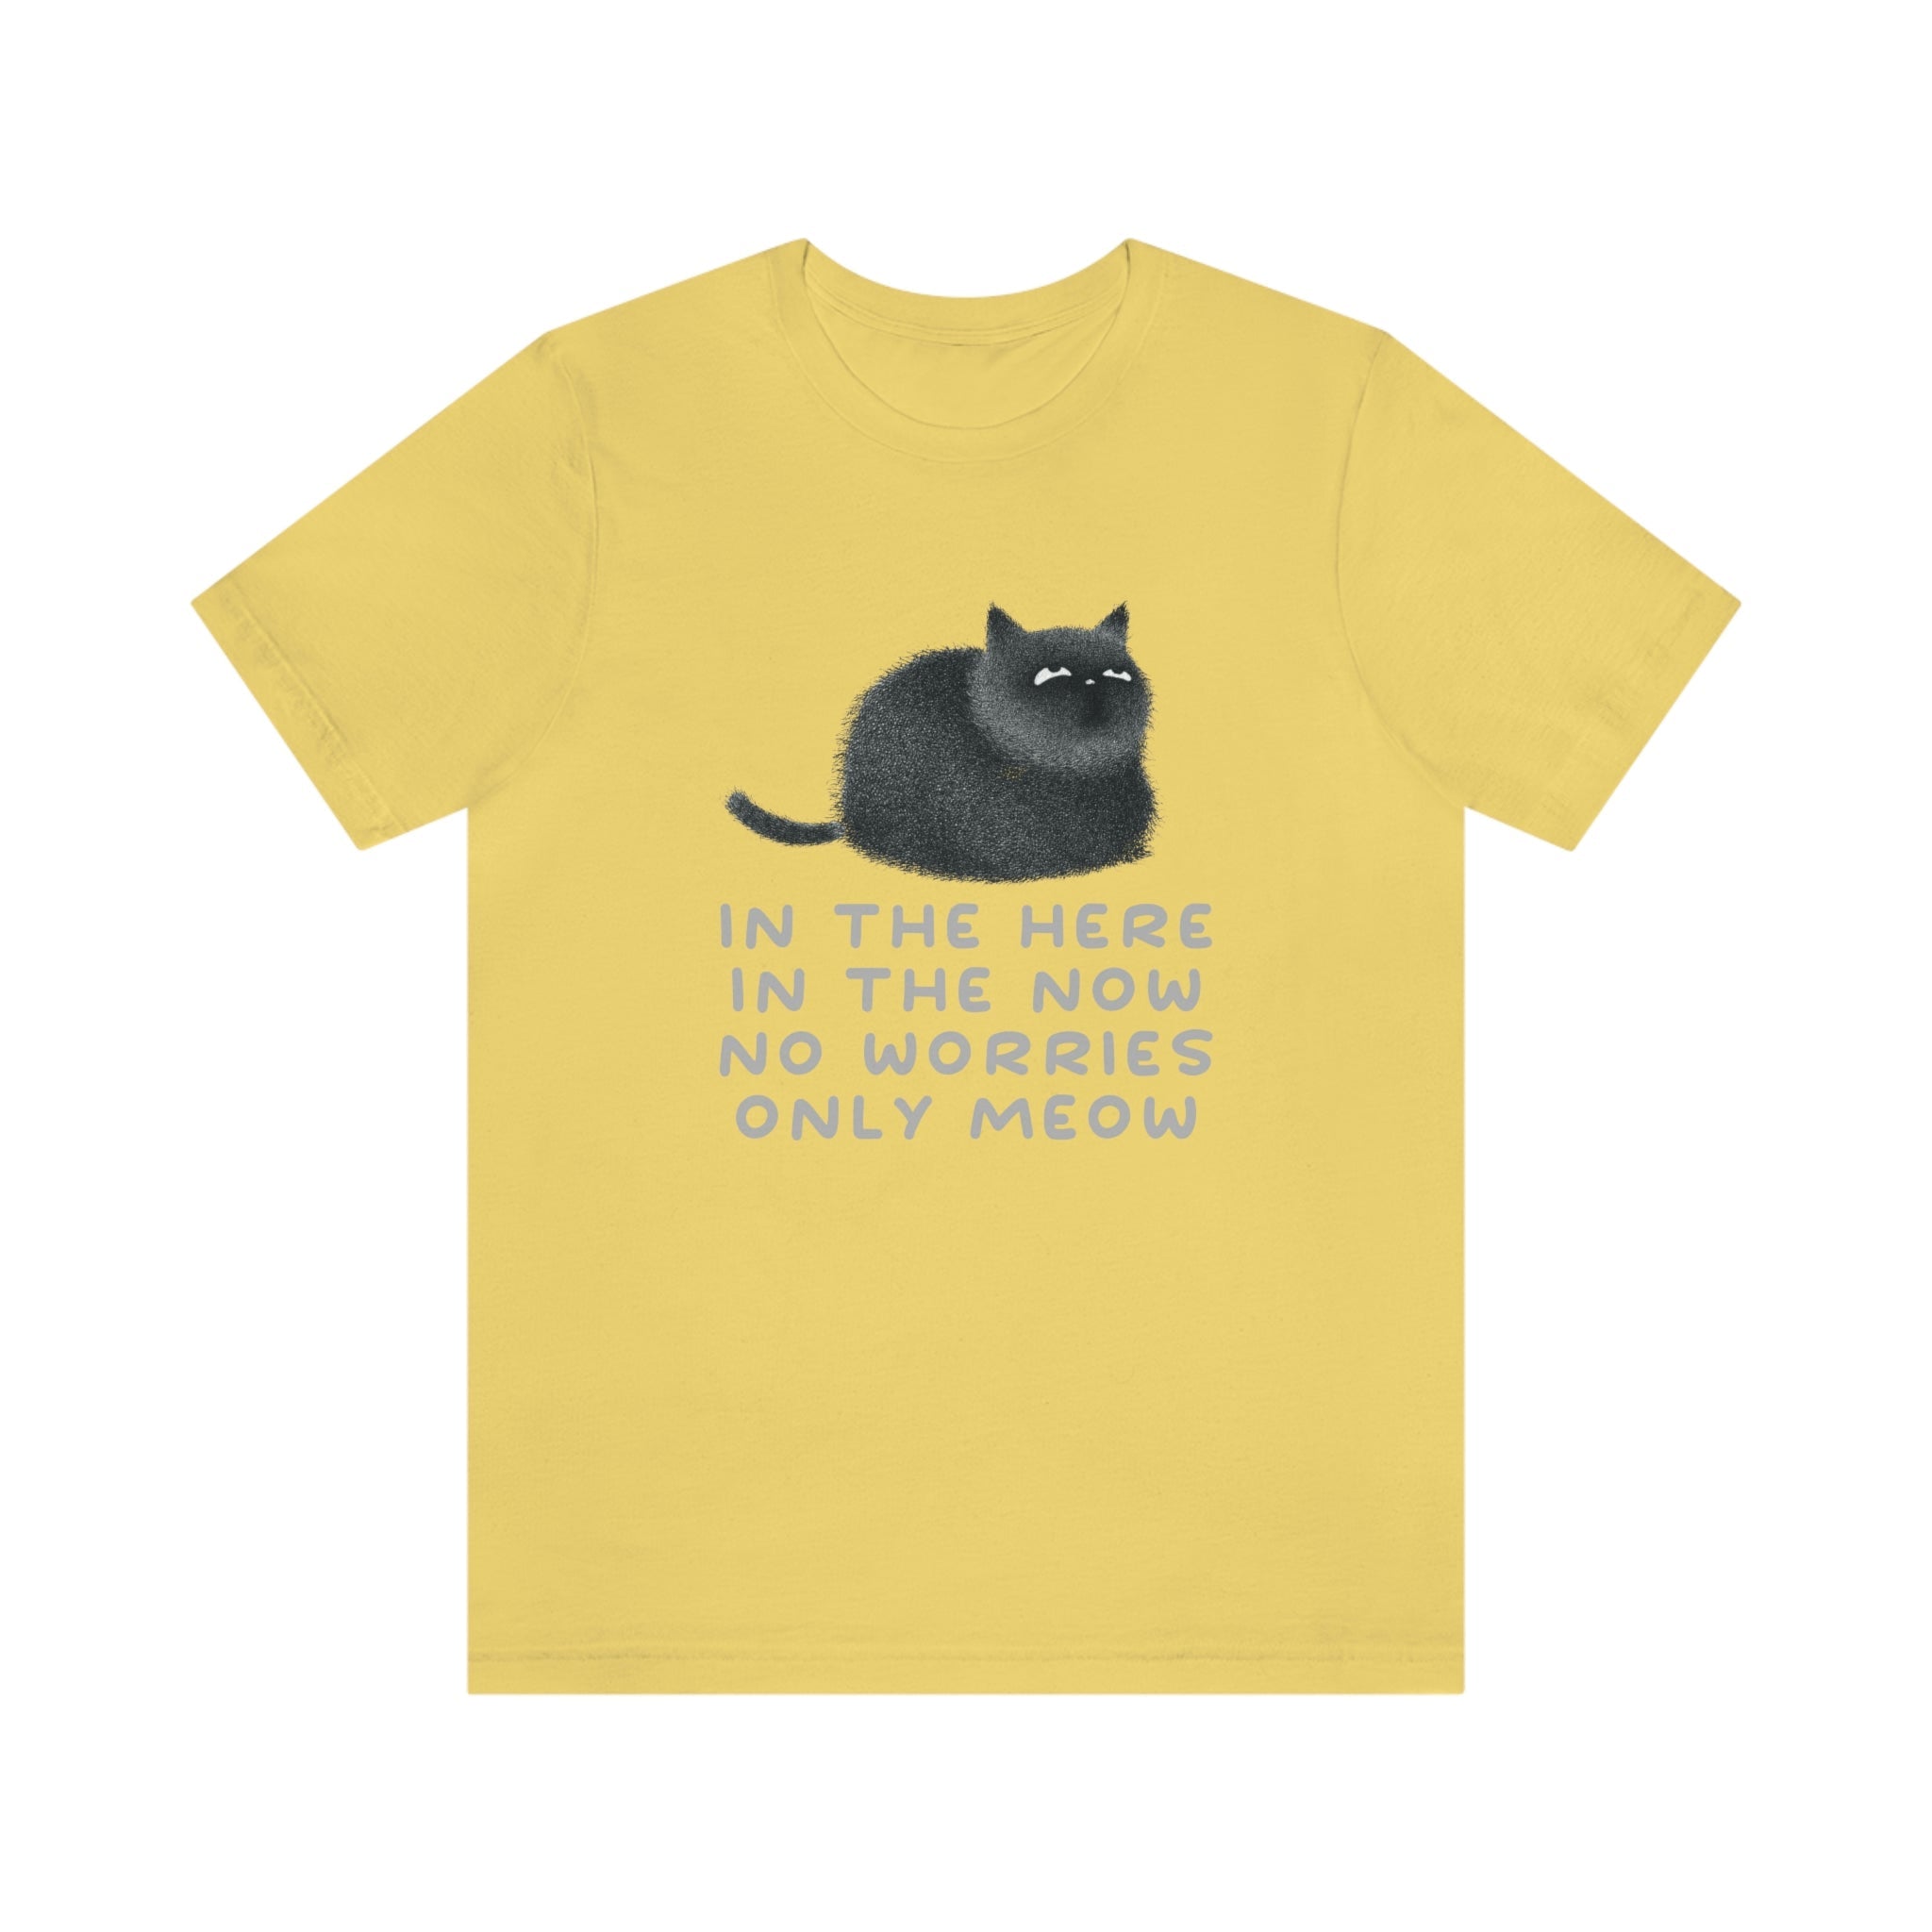 Only Meow : Unisex 100% Cotton T-Shirt